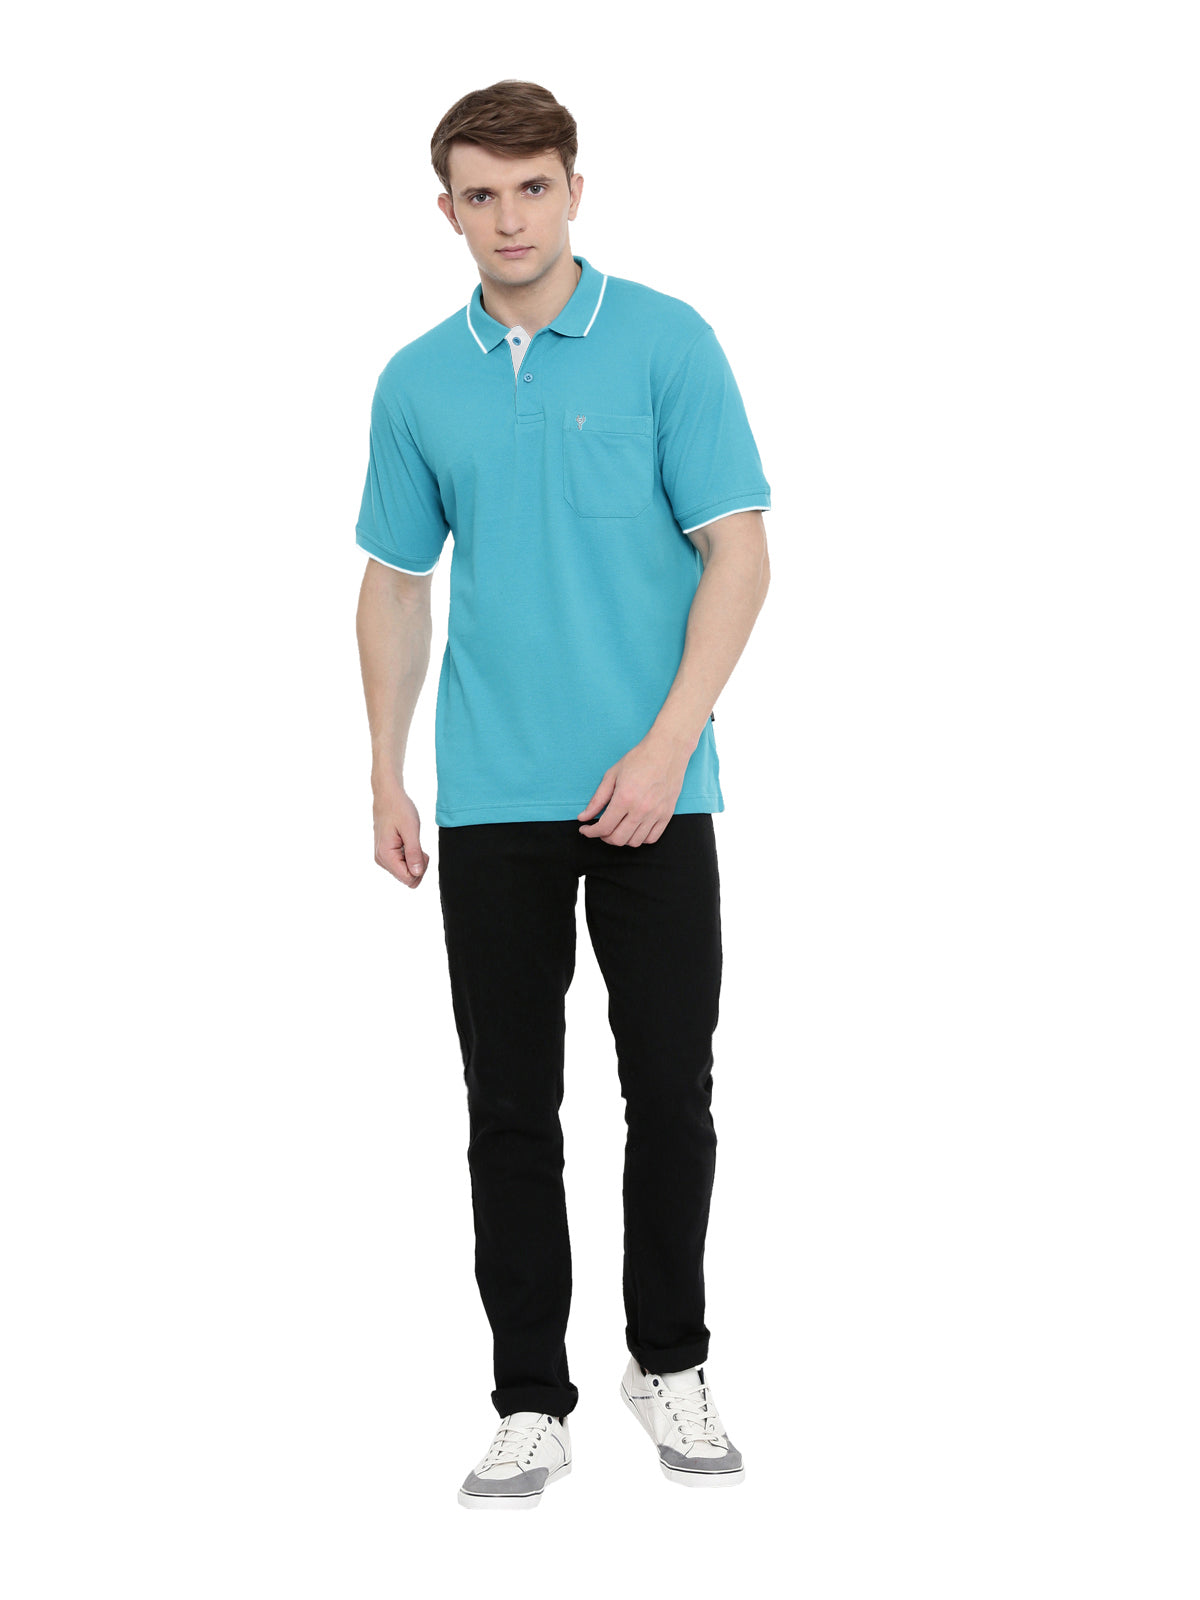 Classic Polo Men's Diva Blue Authentic Fit Polo T-Shirt | 4SSN 209